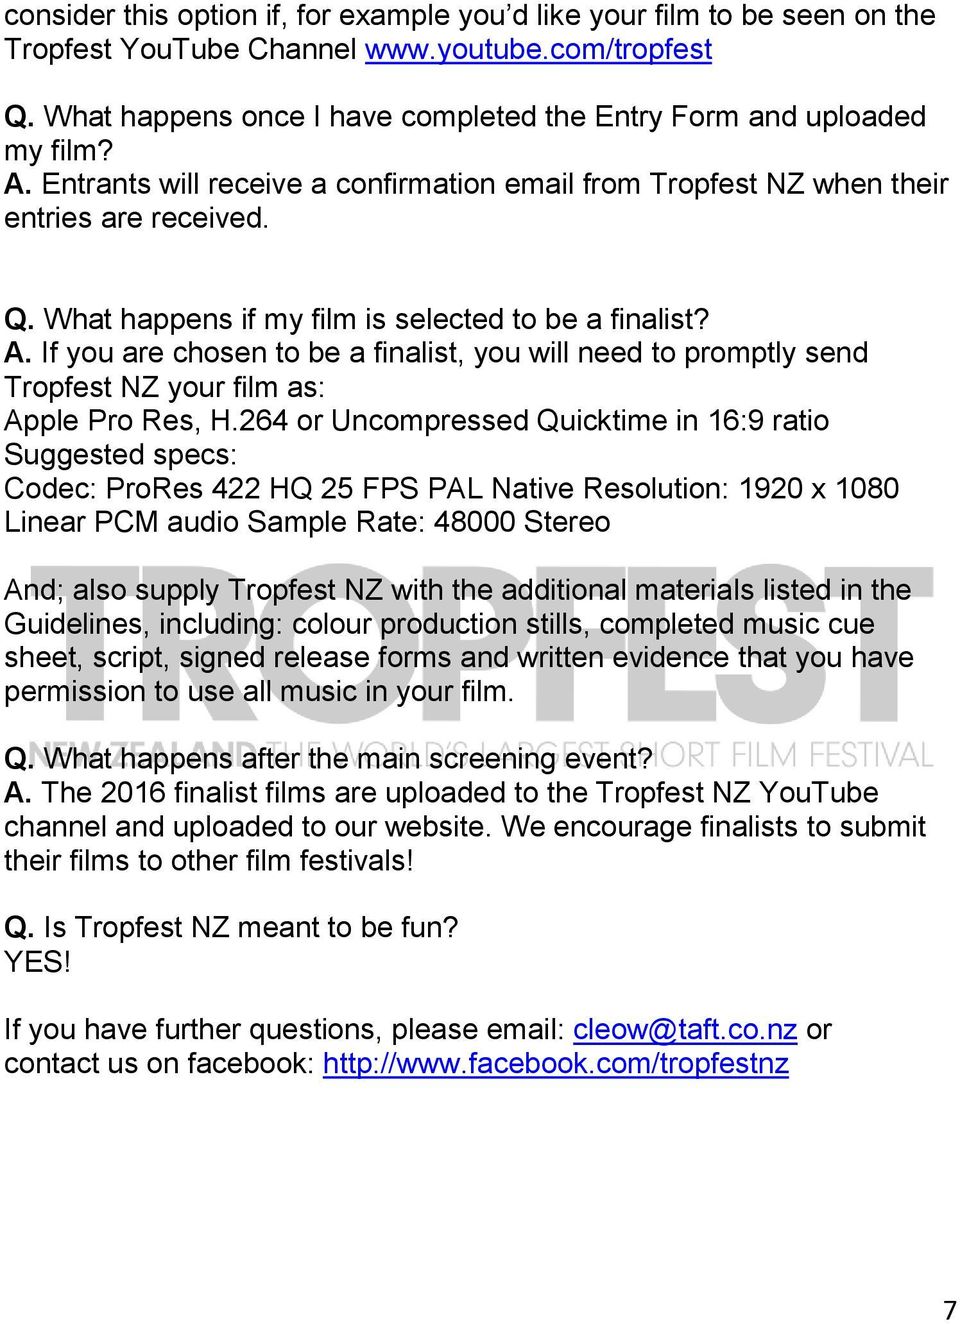 If you are chosen to be a finalist, you will need to promptly send Tropfest NZ your film as: Apple Pro Res, H.